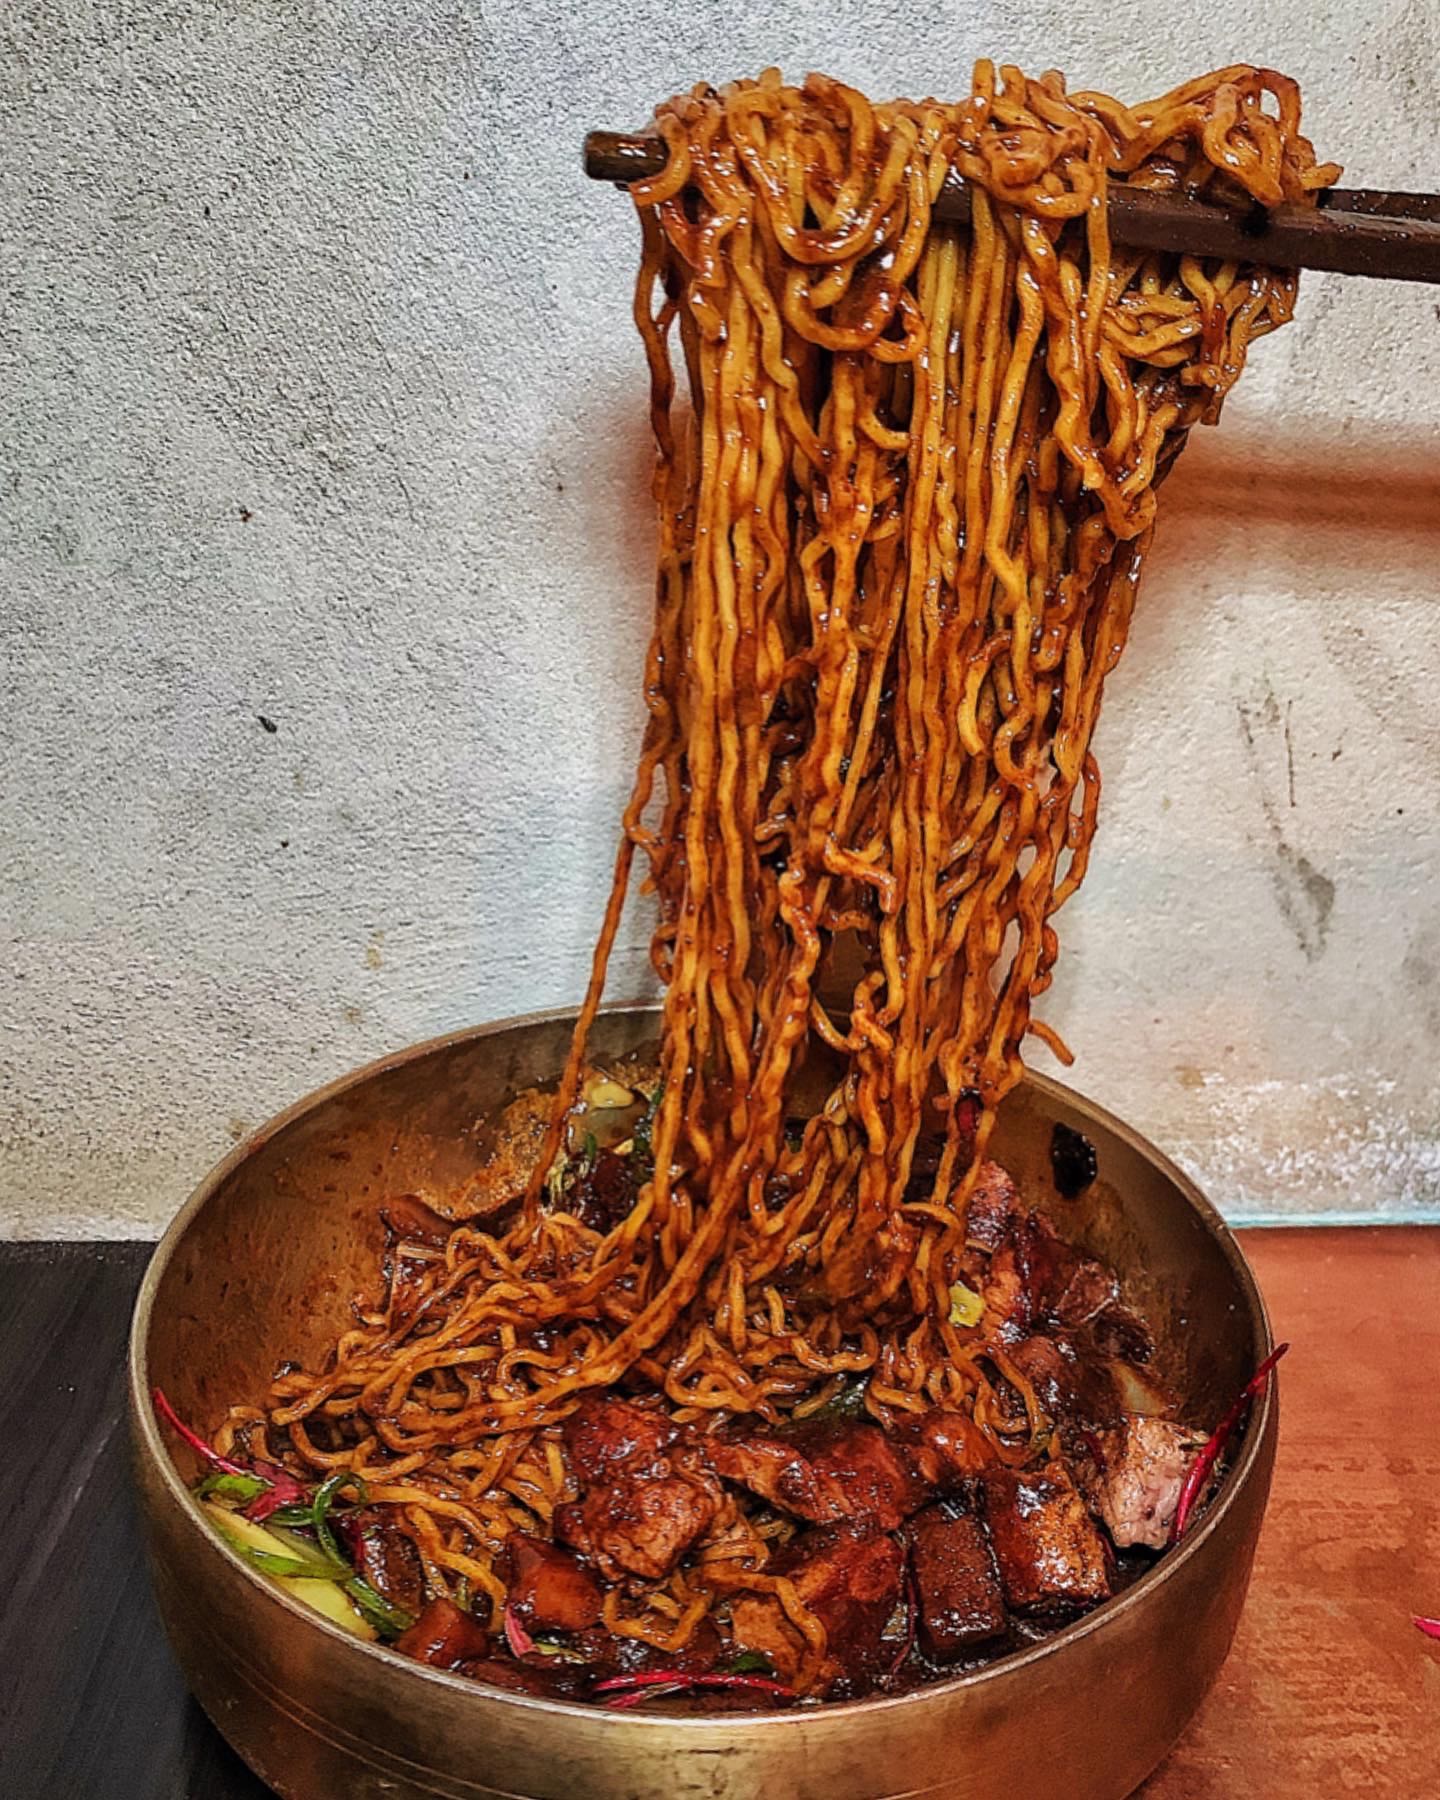 A metal bowl with noodles and steak inside, with noodles being pulled up.